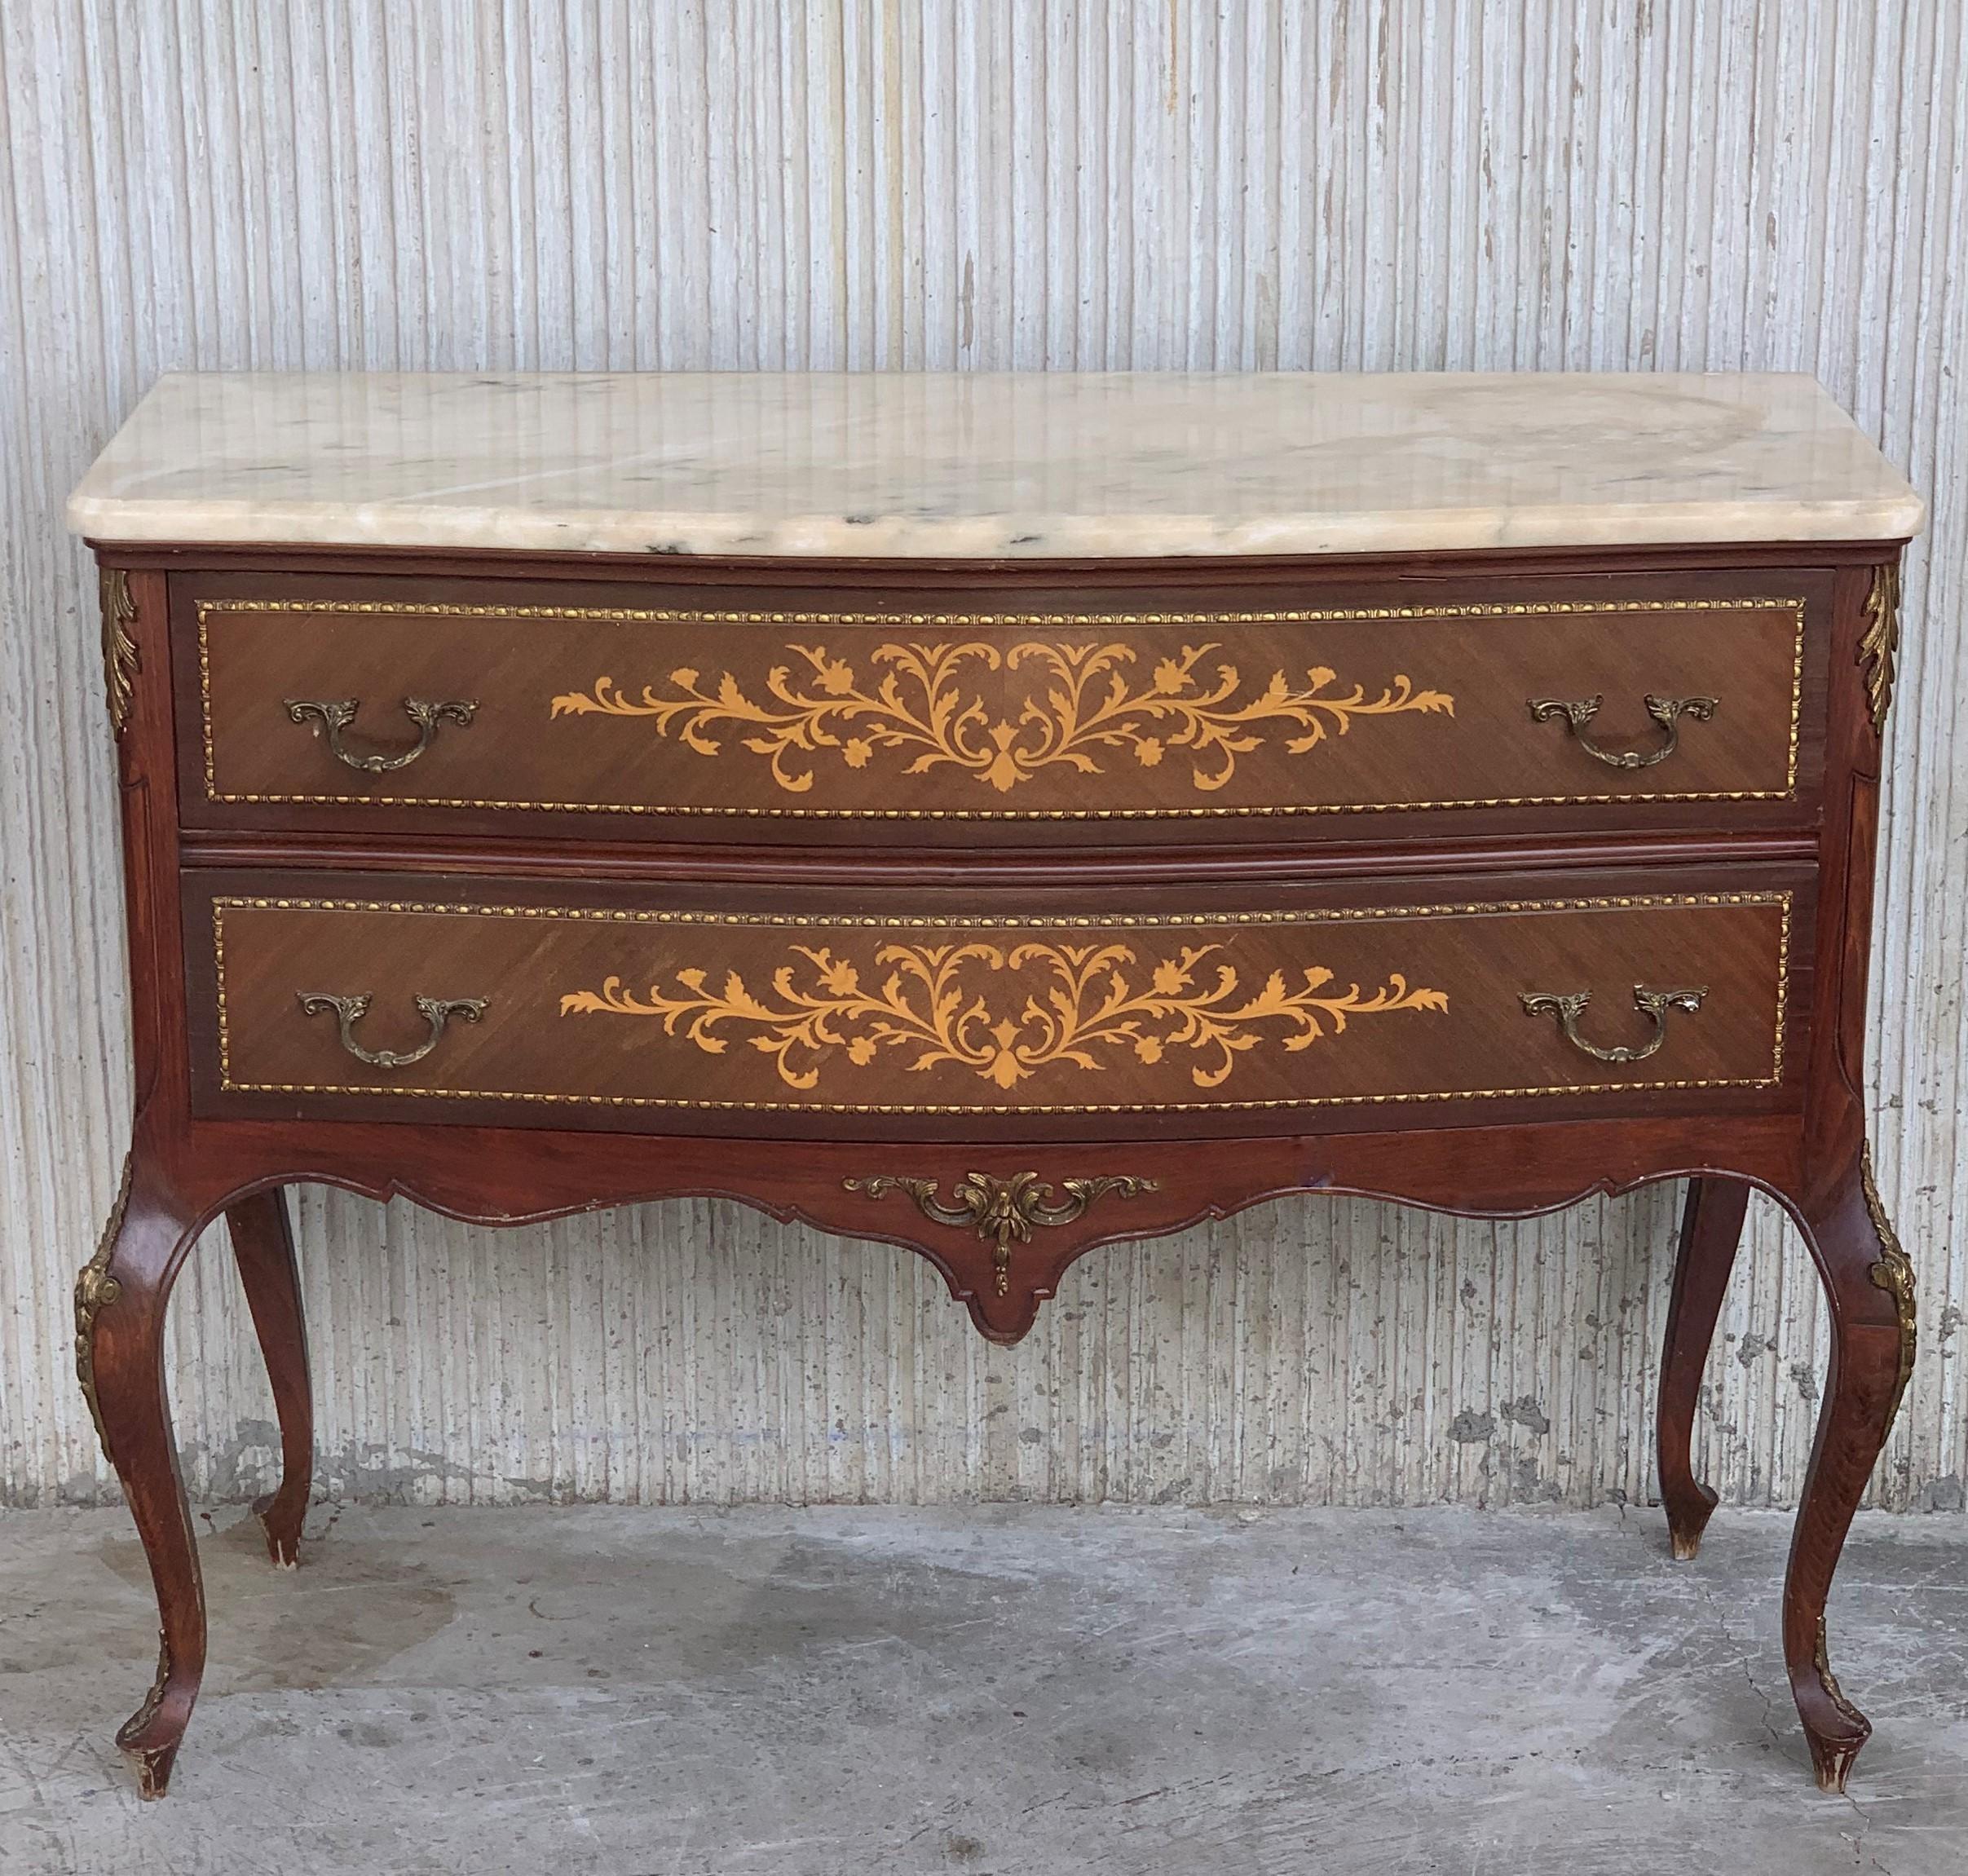 French Provincial 20th Century Marquetry Chest of Drawers with Bronze Details and Cream Marble Top For Sale